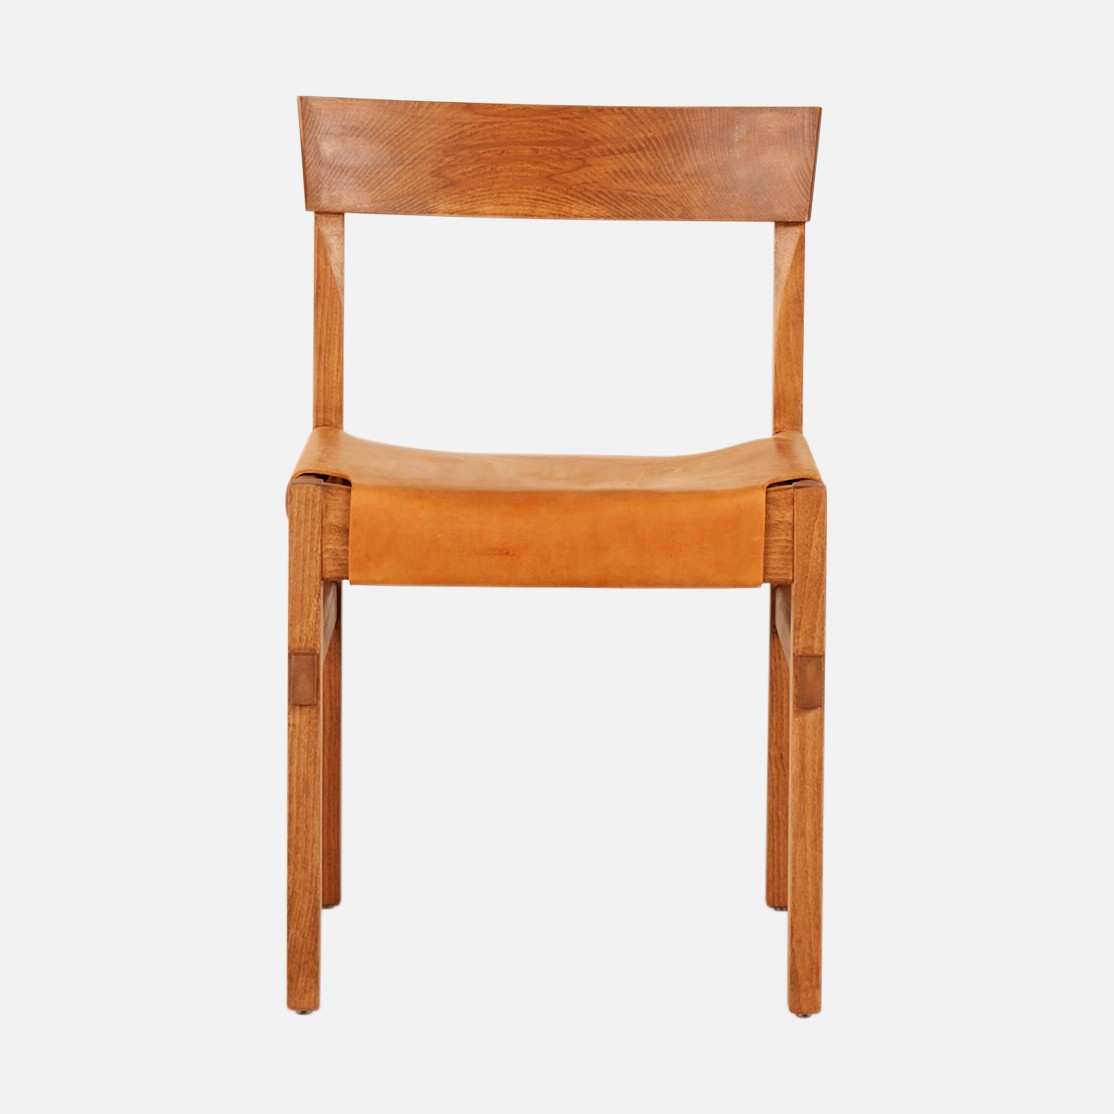 a wooden chair against a white background